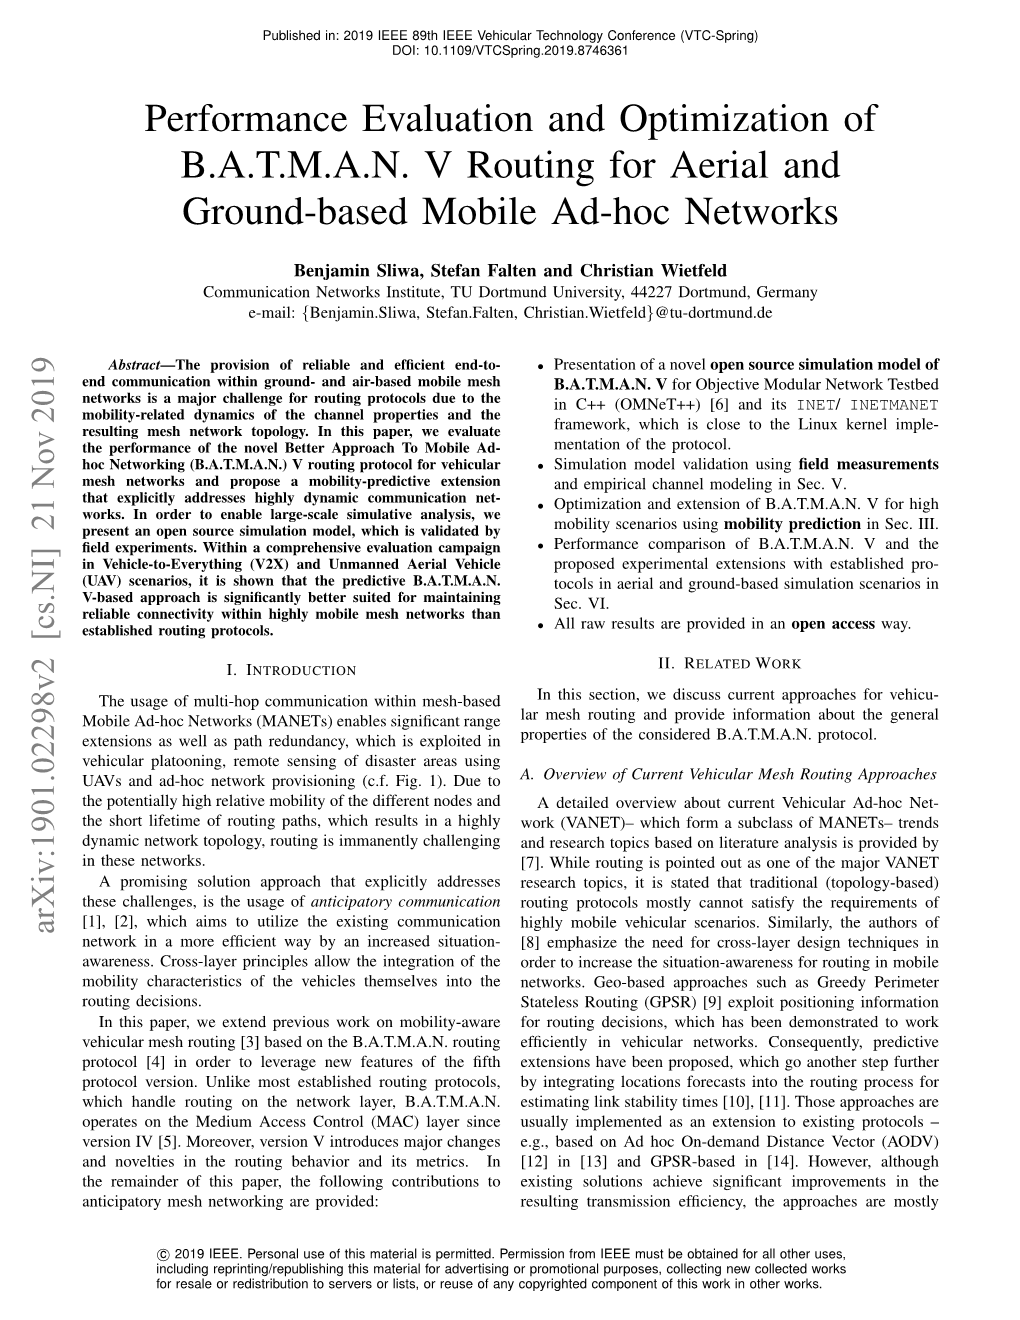 Performance Evaluation and Optimization of B.A.T.M.A.N. V Routing for Aerial and Ground-Based Mobile Ad-Hoc Networks